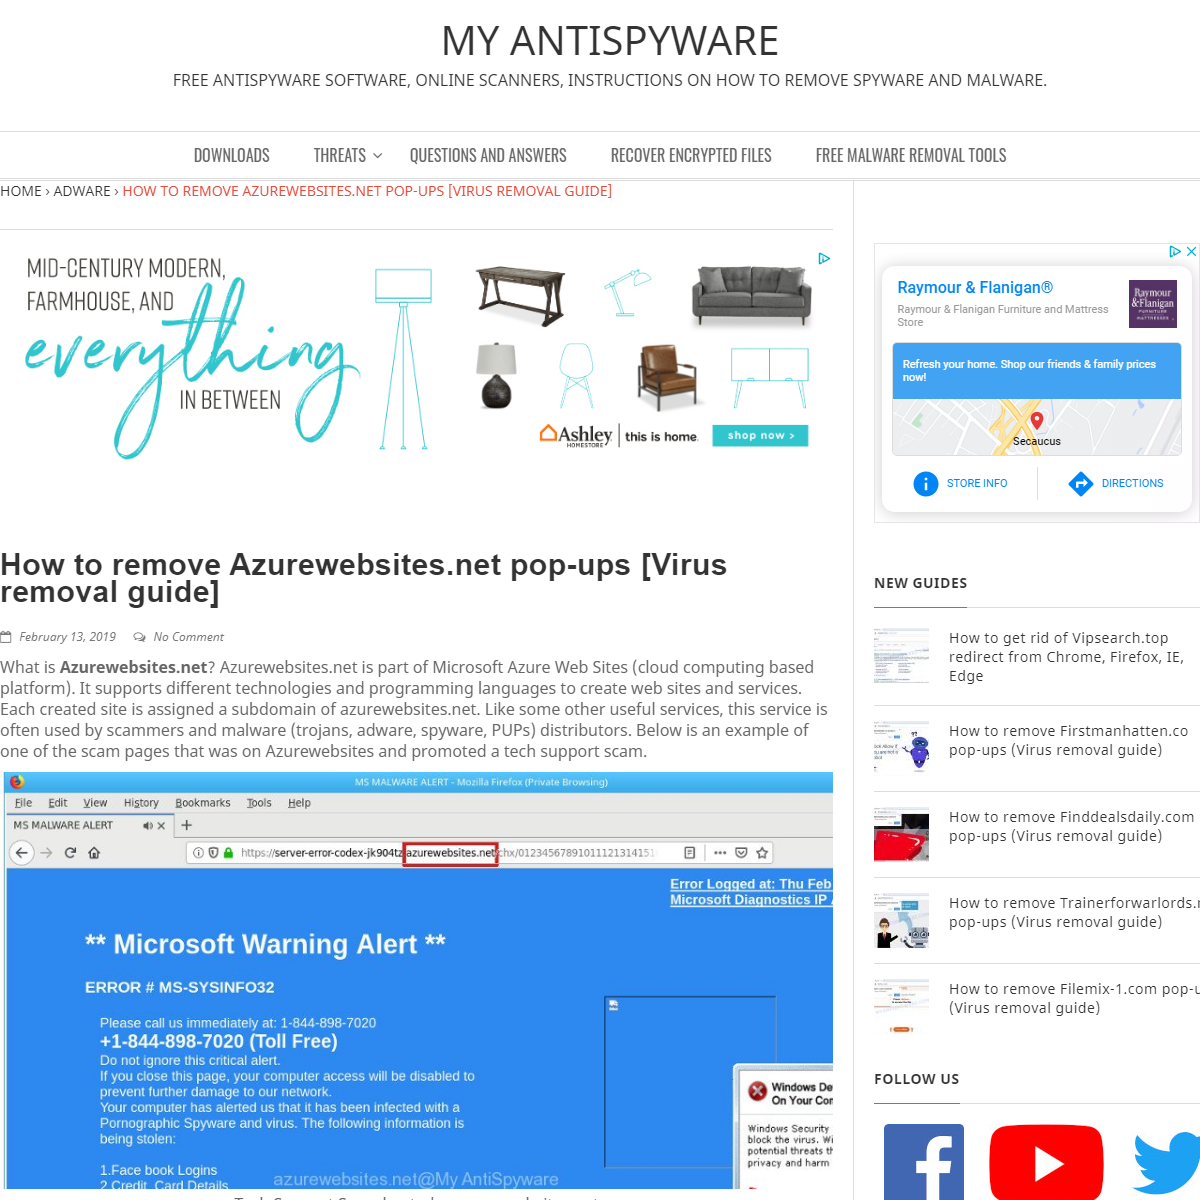 How to remove Azurewebsites.net pop-ups [Virus removal guide]